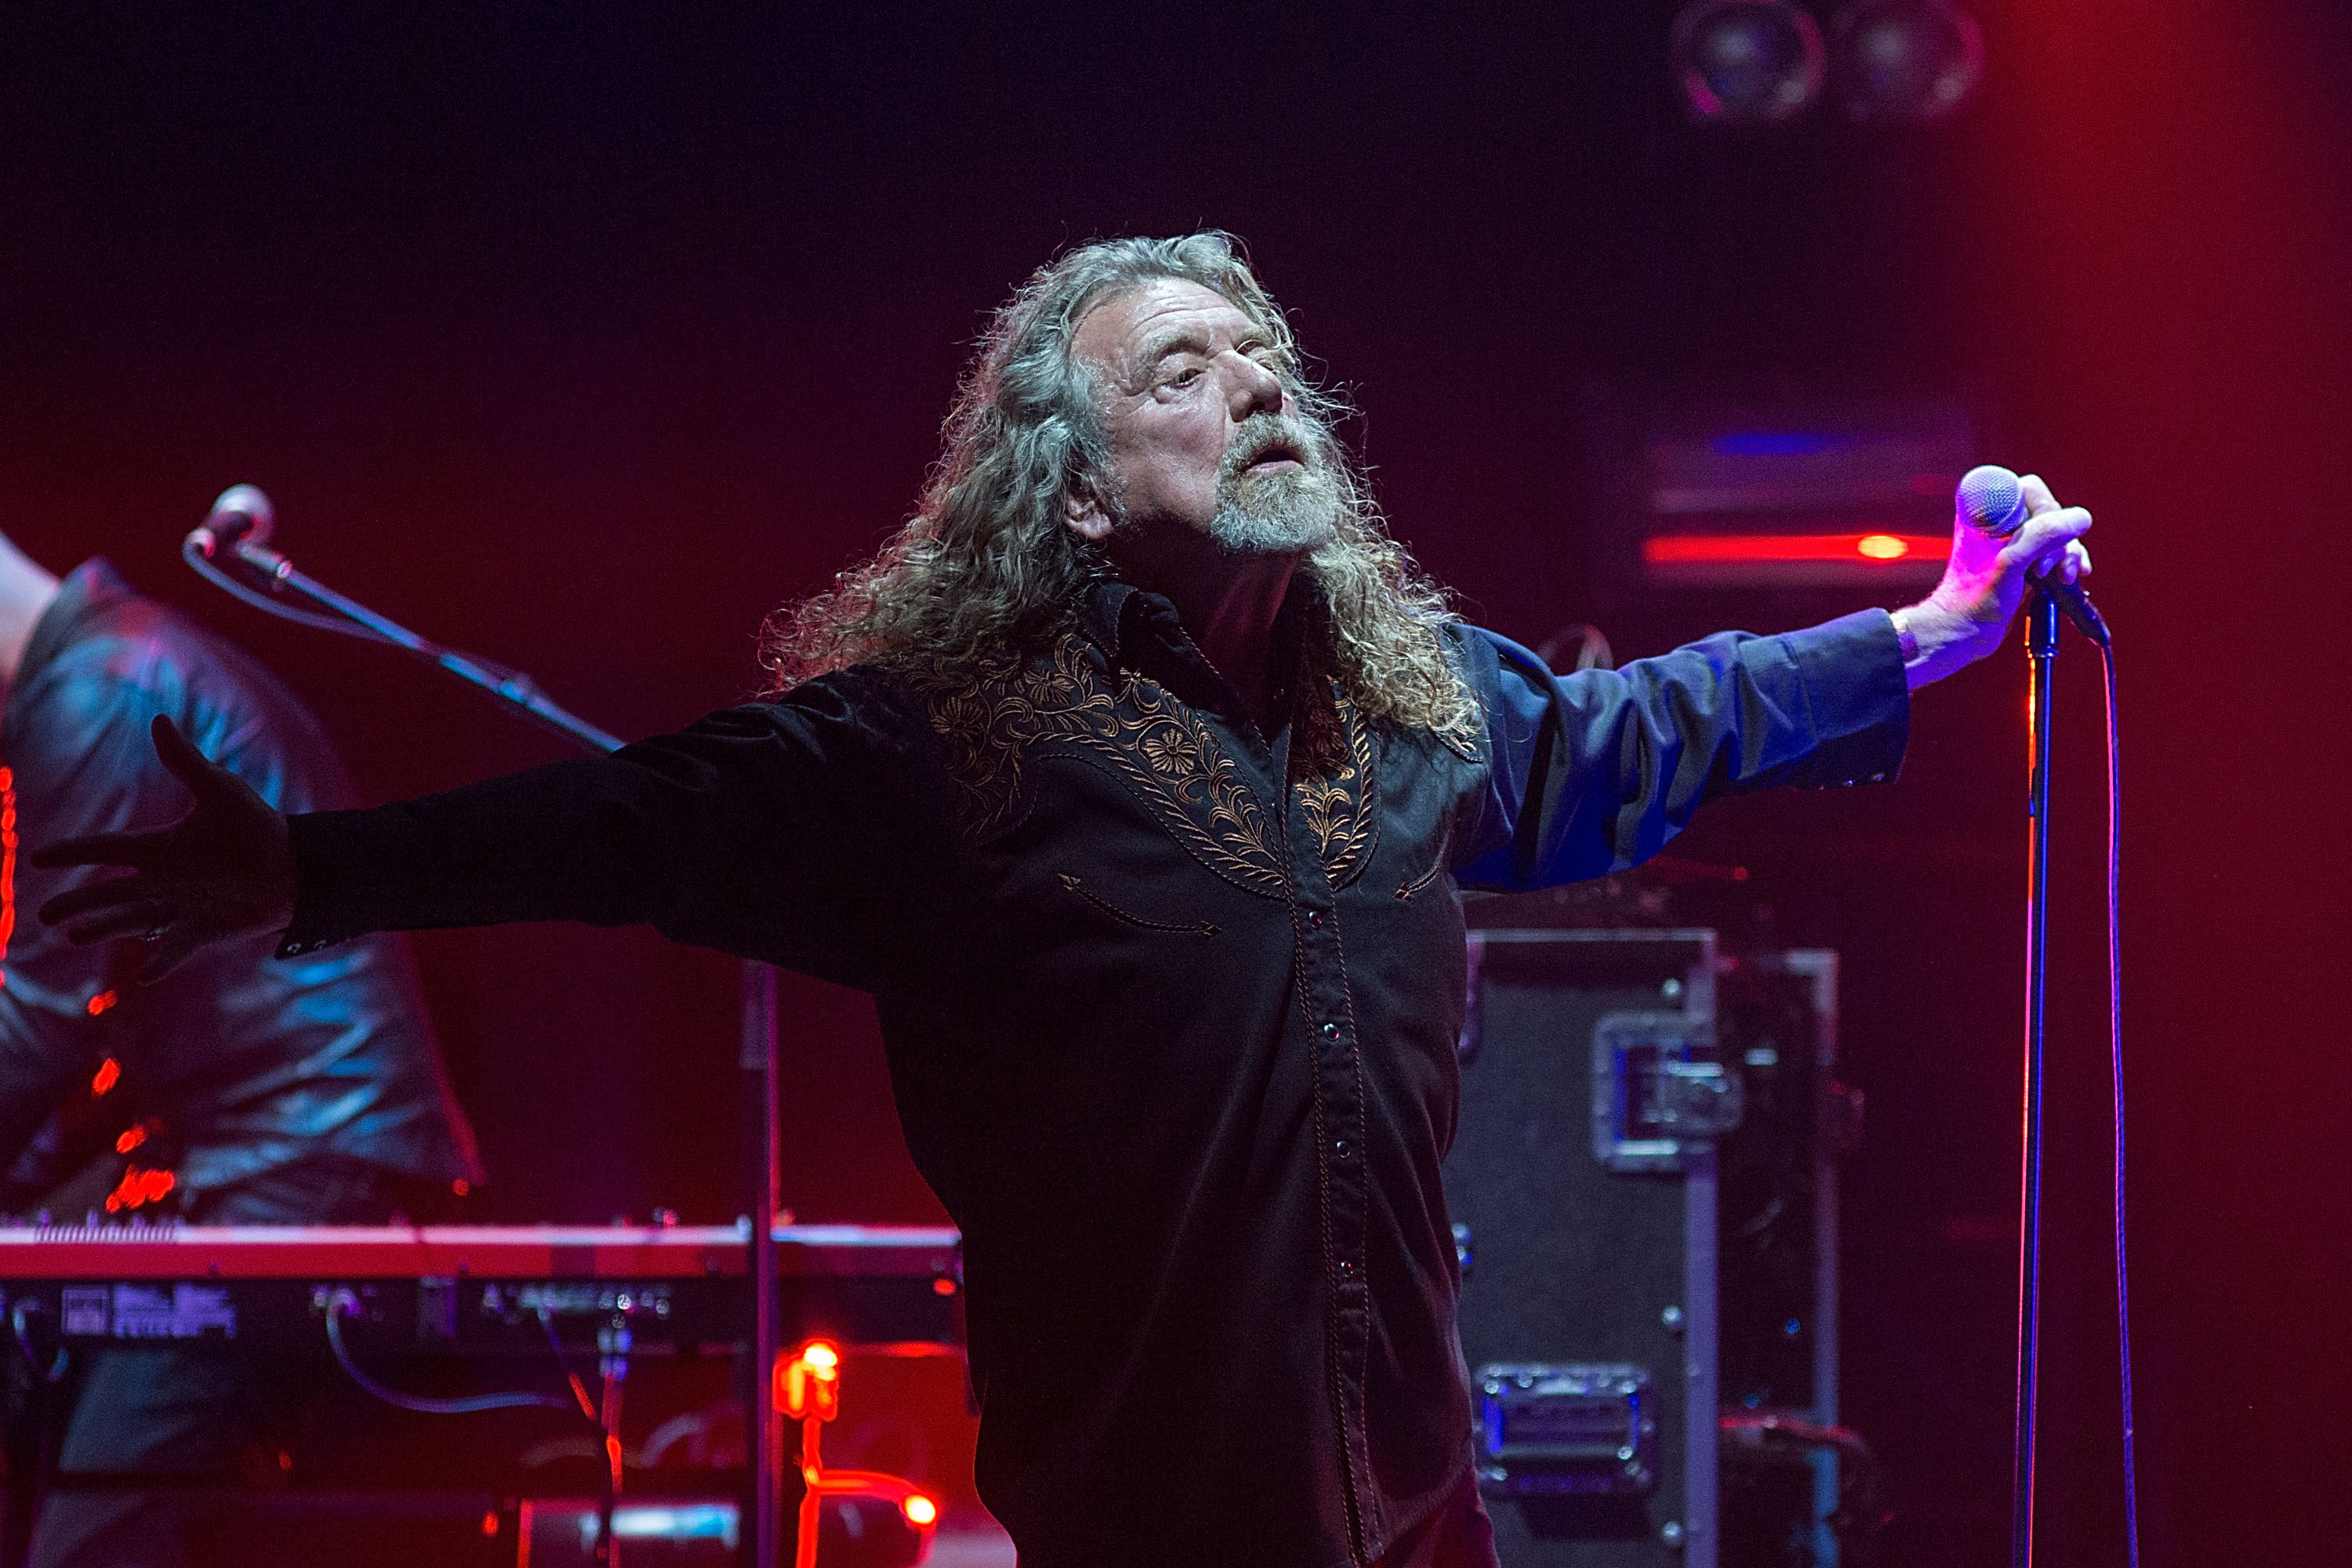 Robert Plant performs at ACL Live in Austin, Texas